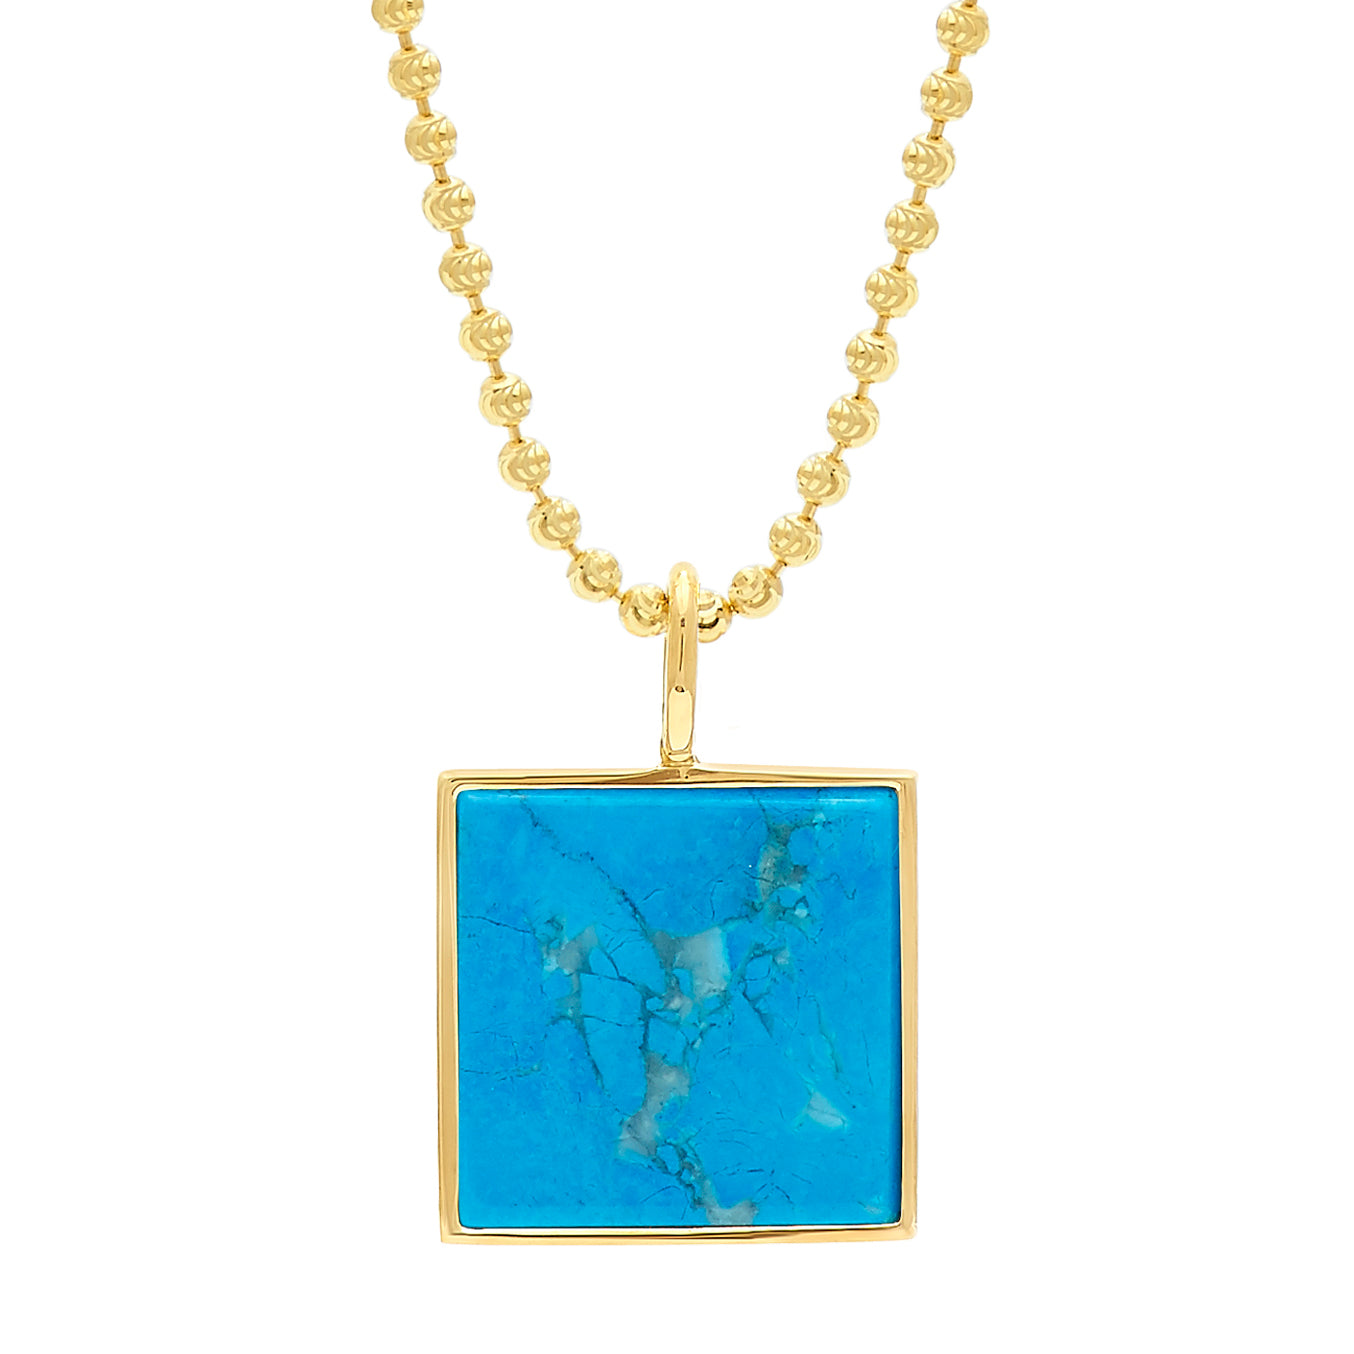 Samuel Necklace - Turquoise